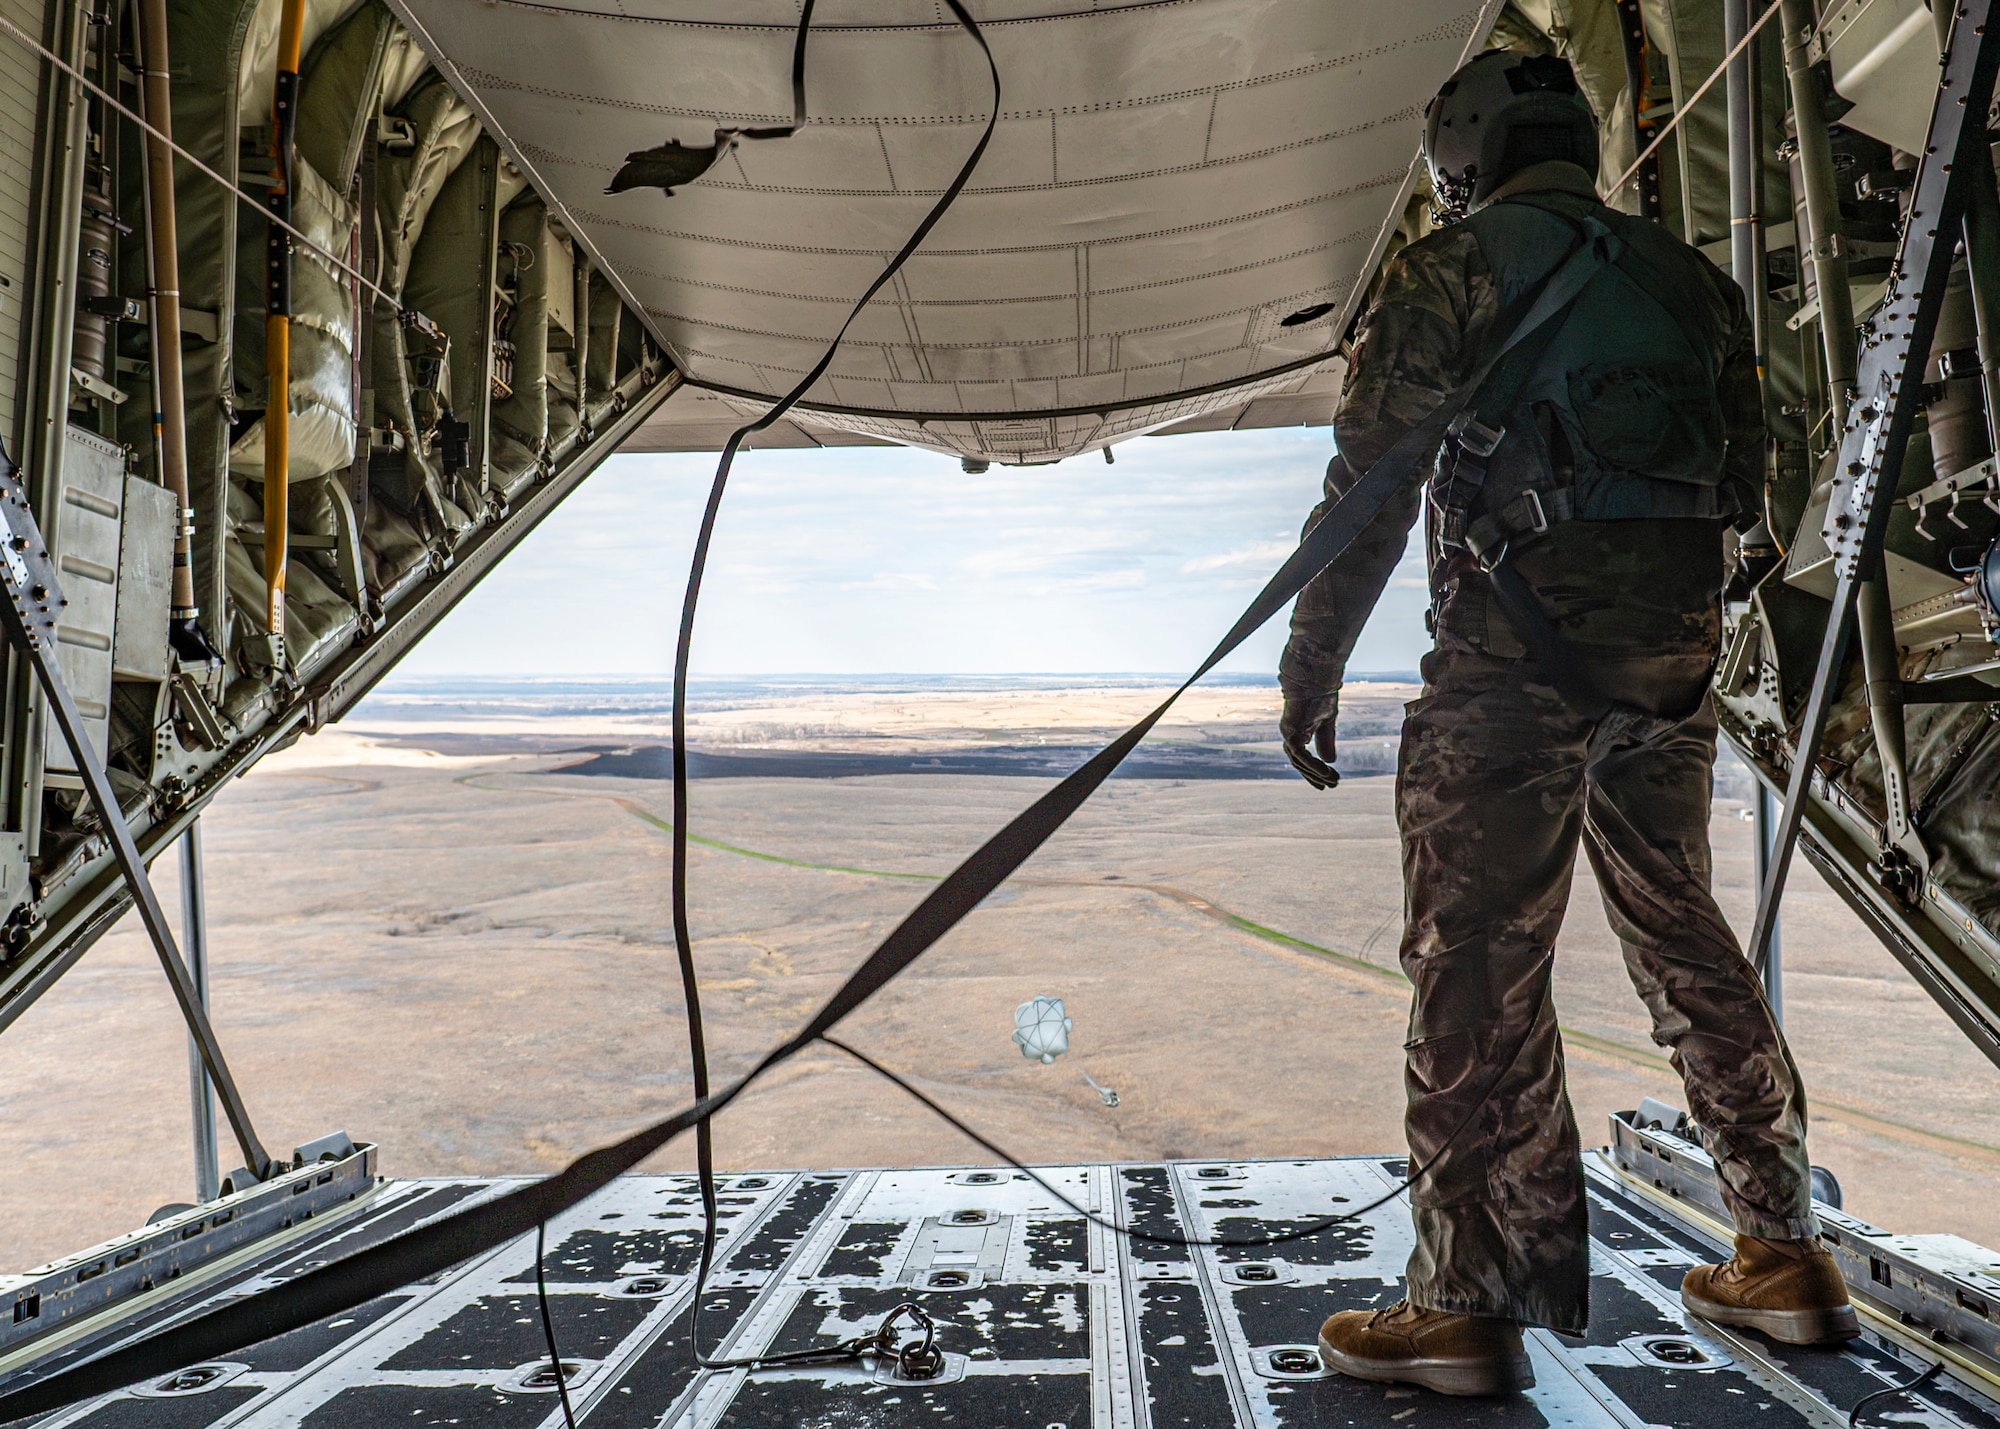 U.S. Air Force Airman 1st Class Erick Fuentes, 71st Rescue Squadron loadmaster, watches cargo descend to the ground from an HC-130J Combat King II over Salina Regional Airport, Kansas, March 27, 2024. The aerial cargo drop was part of the Rescue Rodeo, a rescue training event and competition. Airmen had to account for plane speed, winds, and altitude when performing the precision drops. (U.S. Air Force photo by Airman 1st Class Leonid Soubbotine)